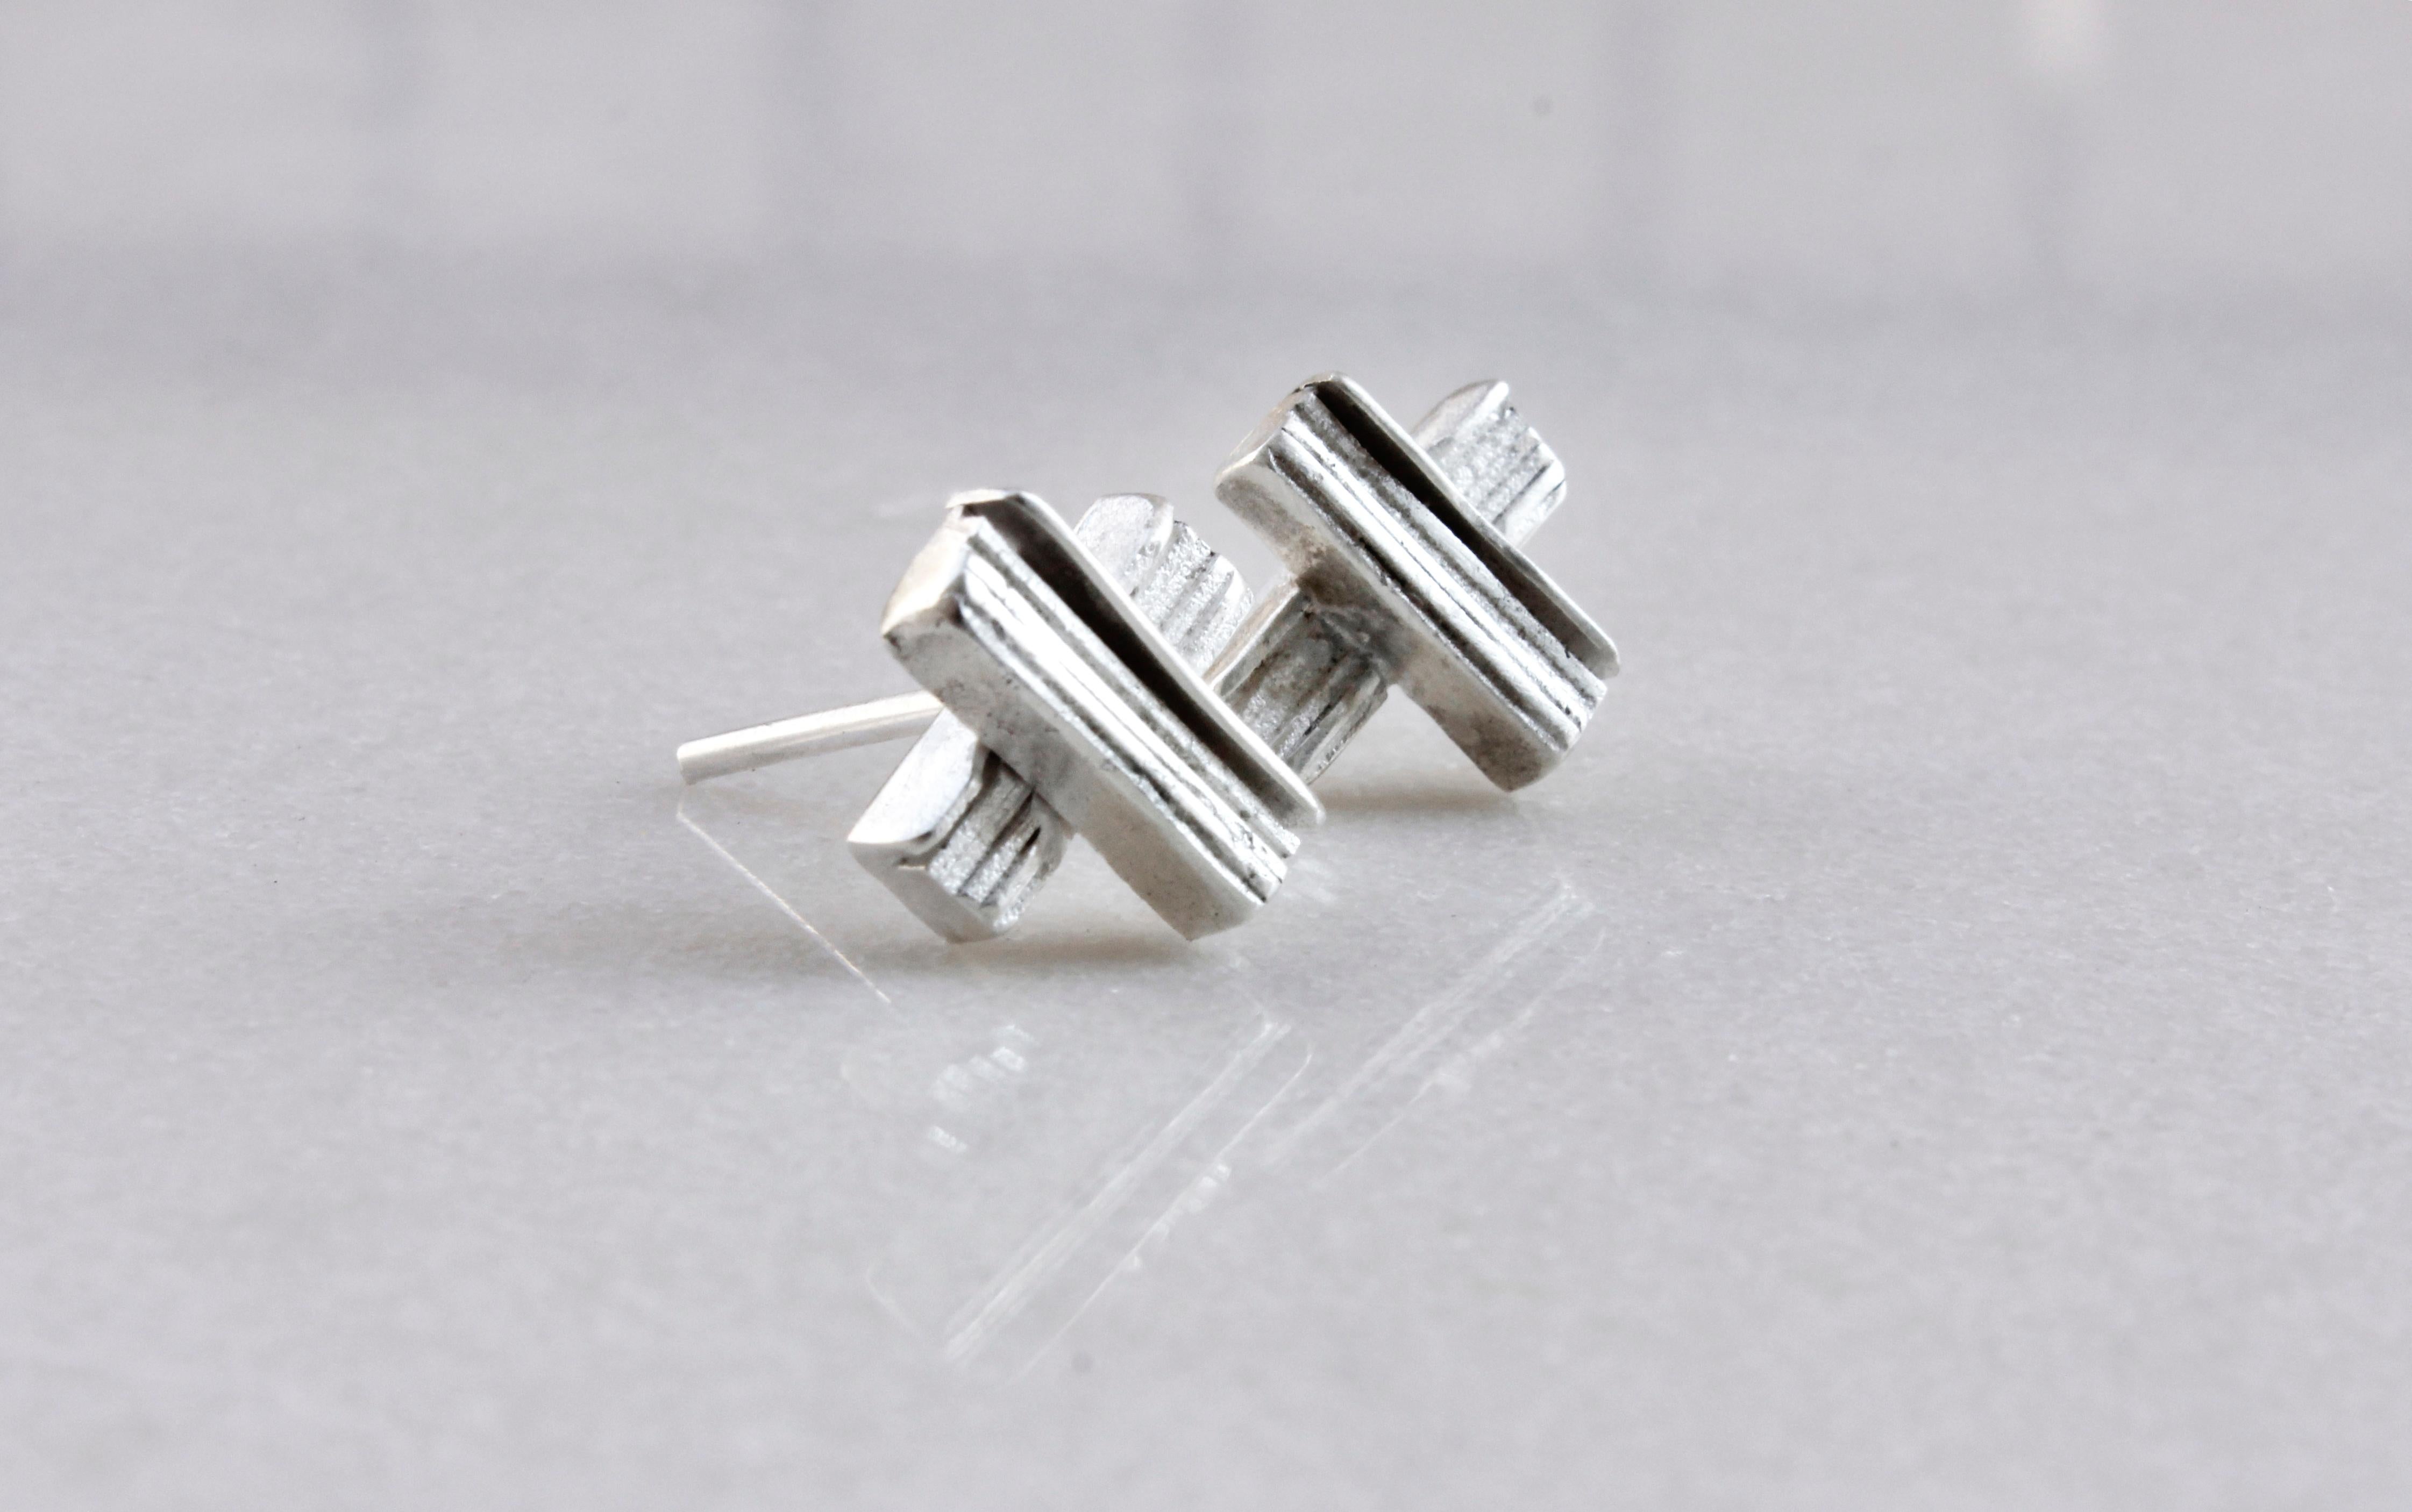 Made from eco silver sheets soldered together, in order to create this unique texture of layers.

The earrings are part of project_x, a collection inspired by the electronic music era.

Length: 0.8 Centimetres

Width: 0.8 Centimetres